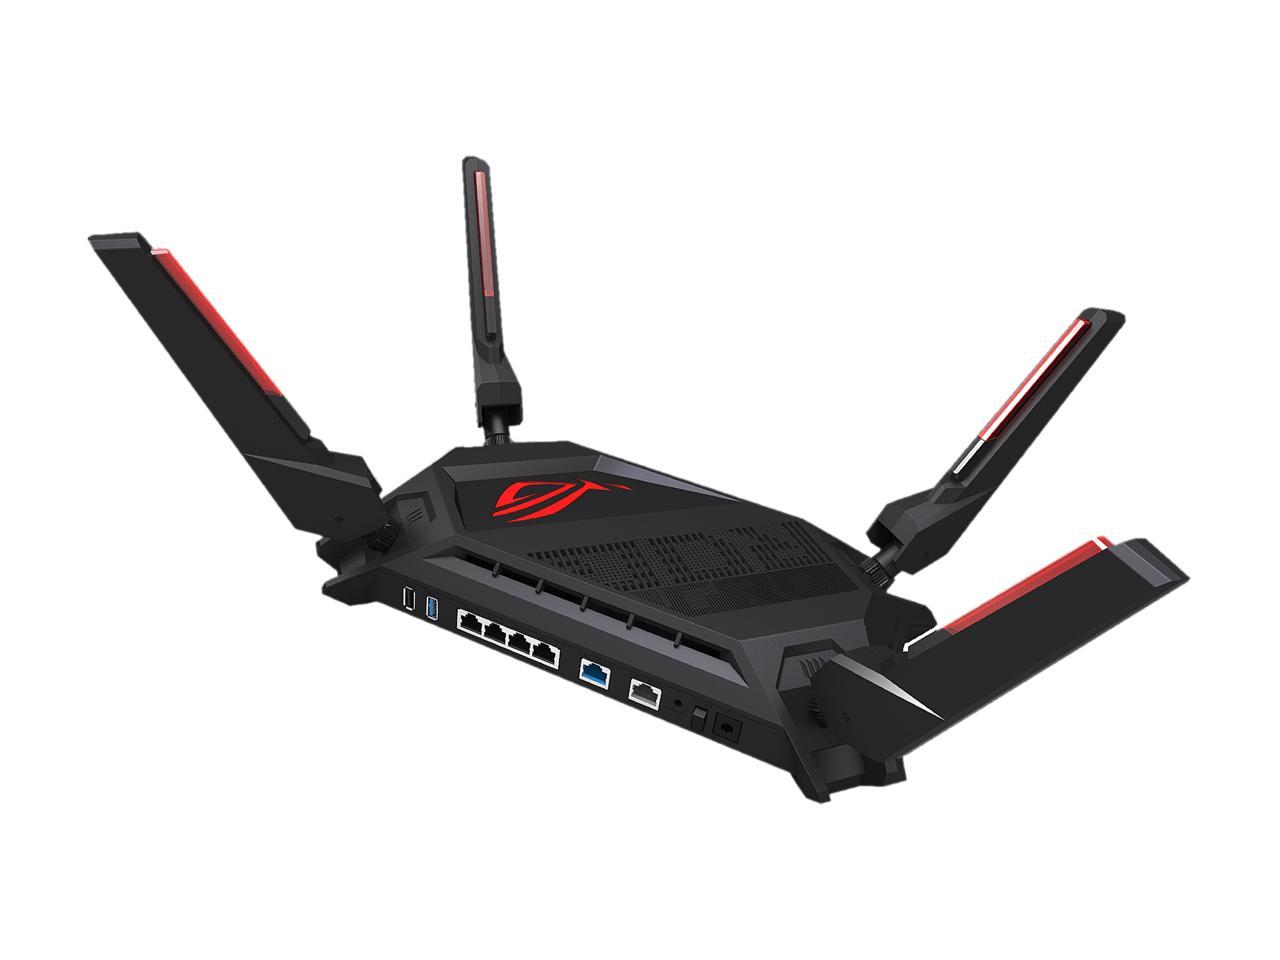 ASUS ROG Rapture GT-AX6000 Dual-Band WiFi 6 (802.11ax) Gaming Router, Dual 2.5G ports, enhanced hardware, WAN aggregation, VPN Fusion, Triple-Level Game Acceleration, free network security and AiMesh support